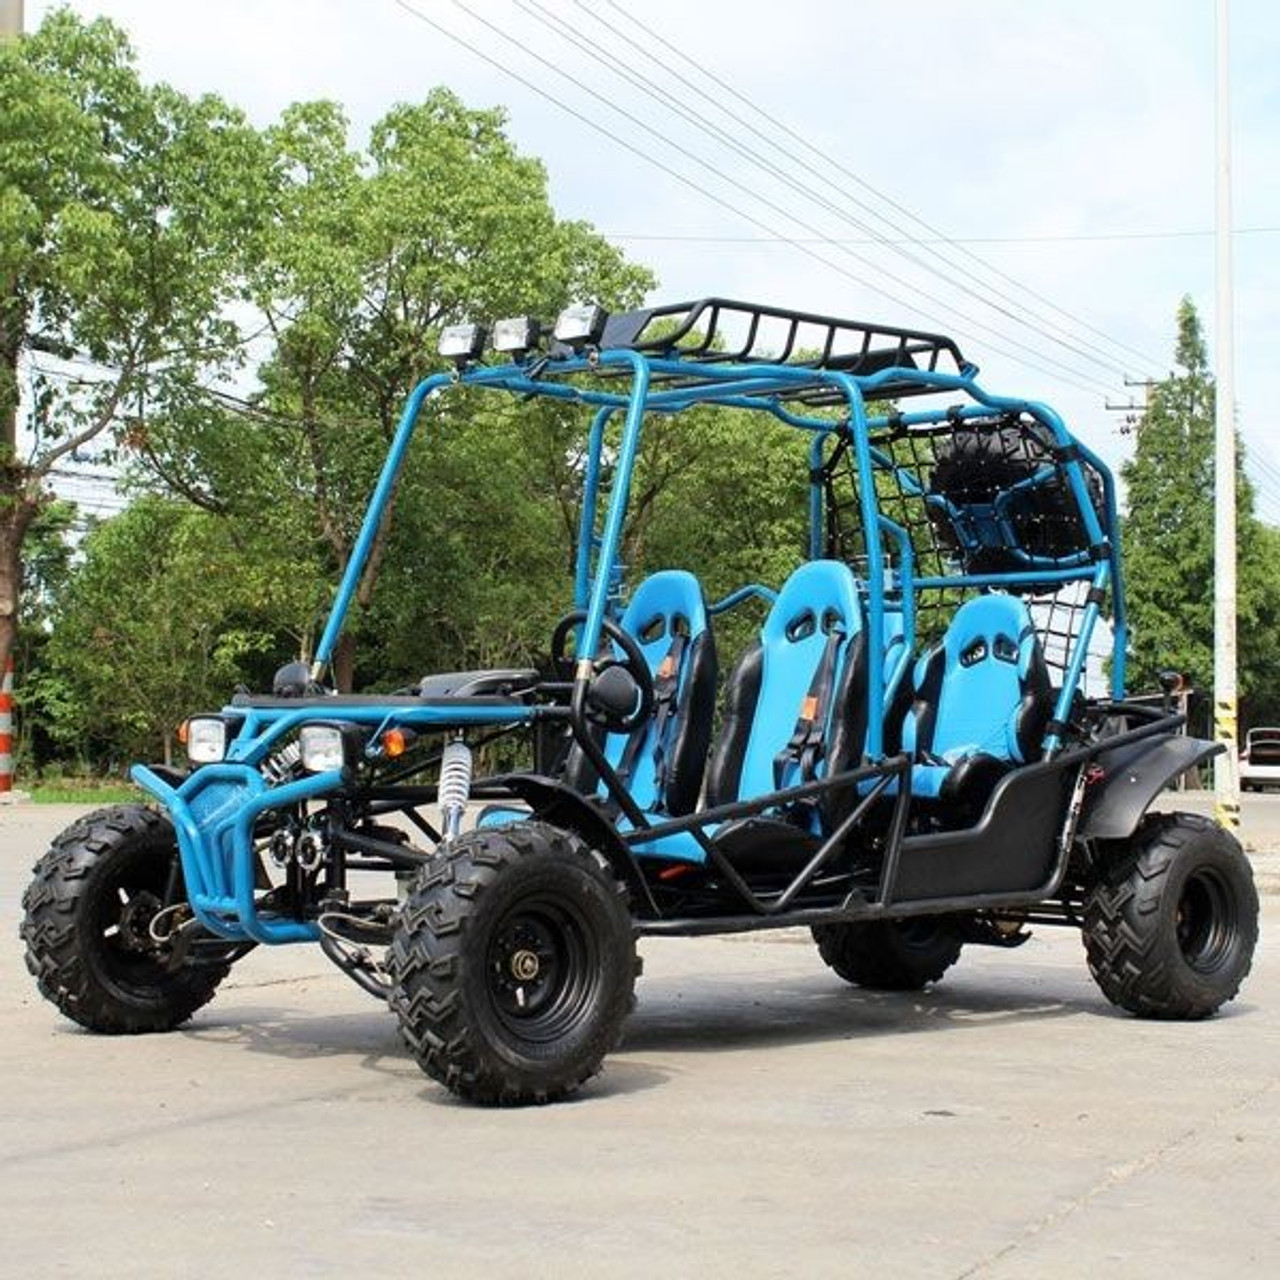 Dongfang 200cc (DF200GHG) Adult Gas Go-Kart, 4 Seater DF GHG With Auto & Reverse Gear - Blue